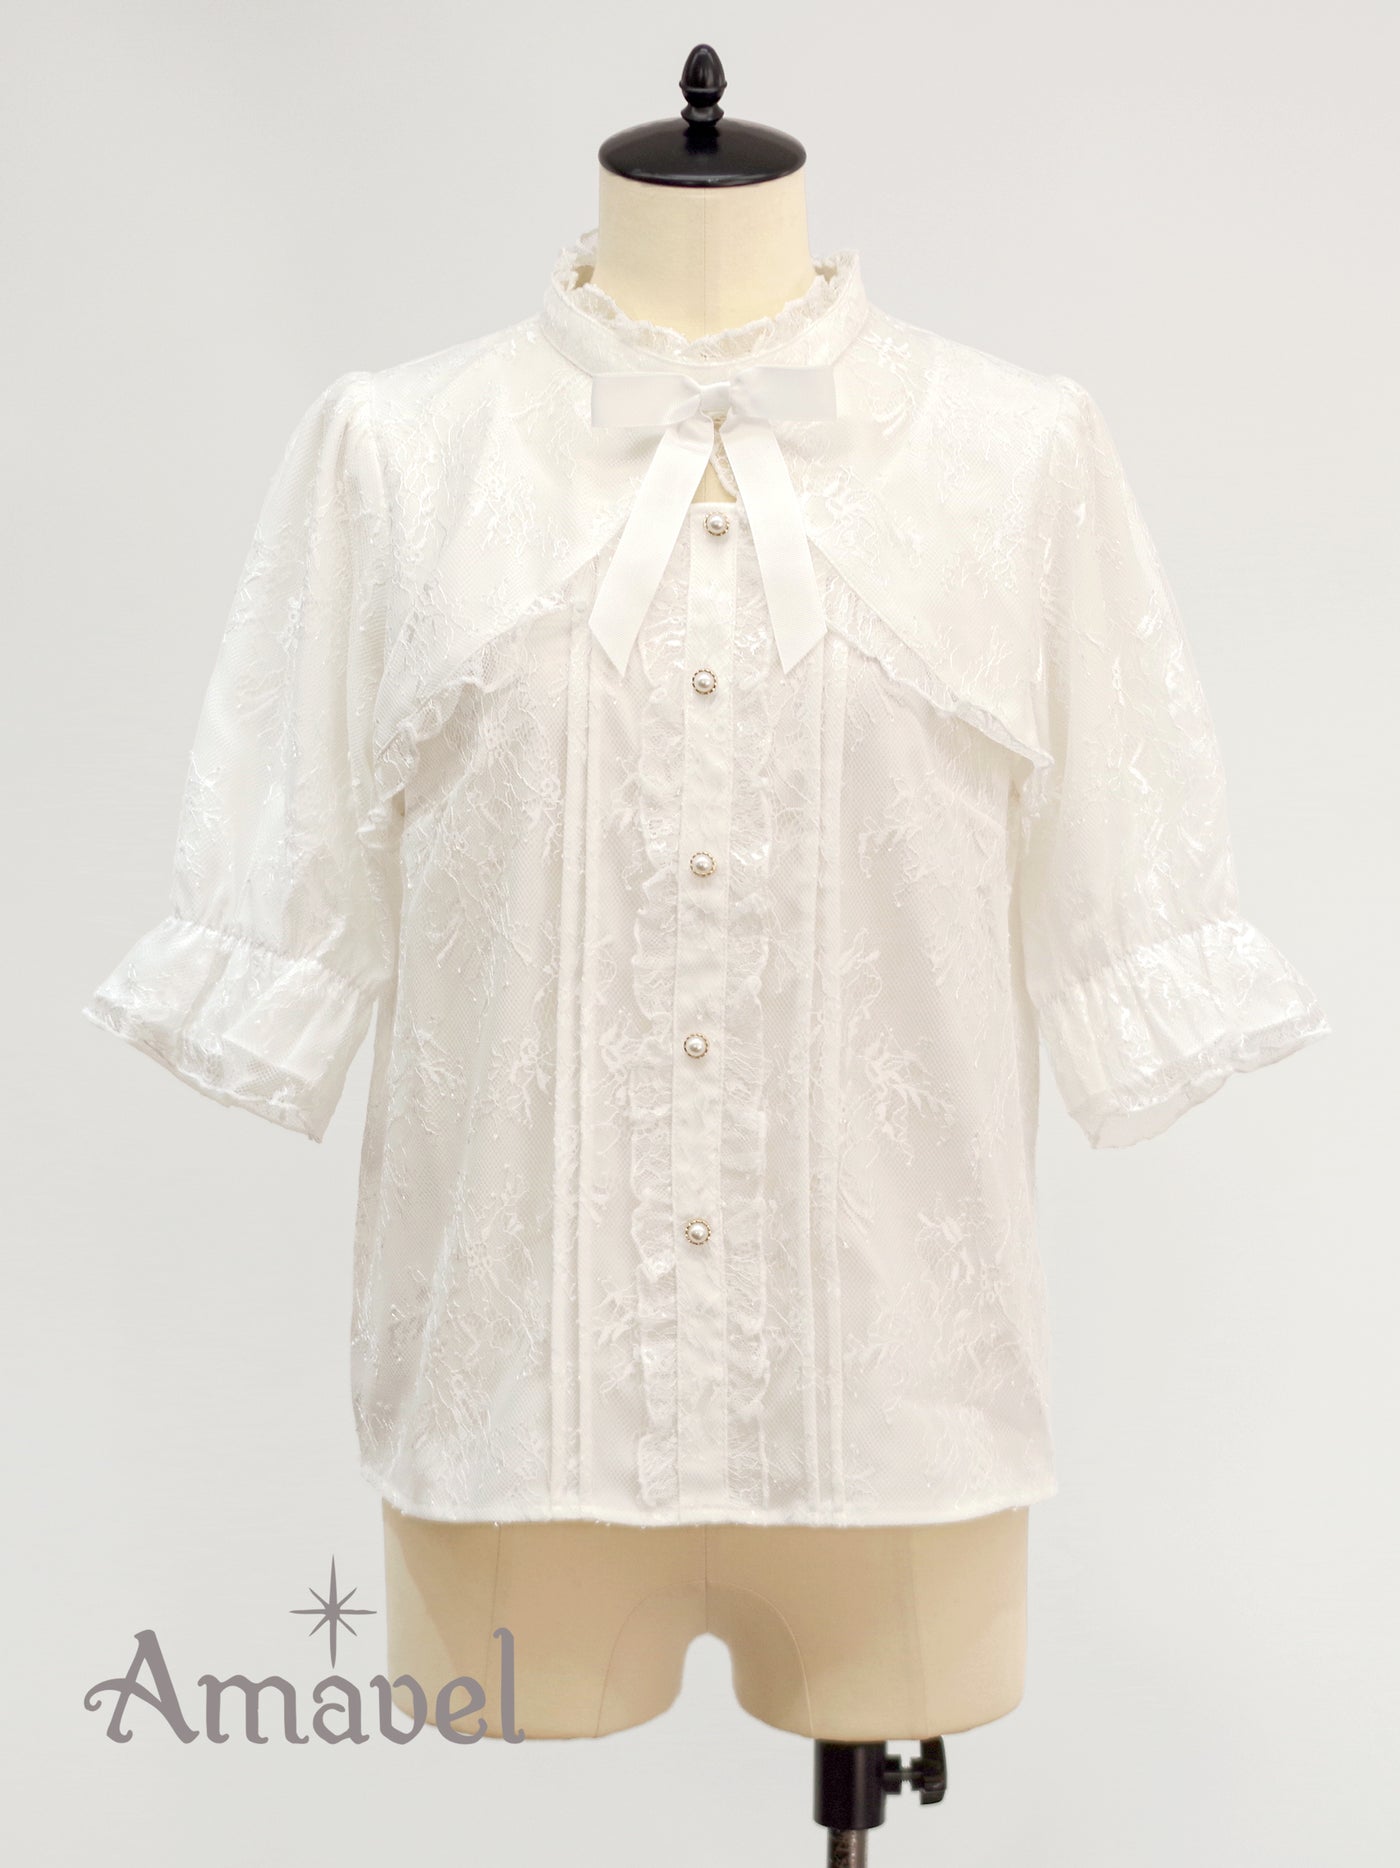 Girly frill decollete open blouse